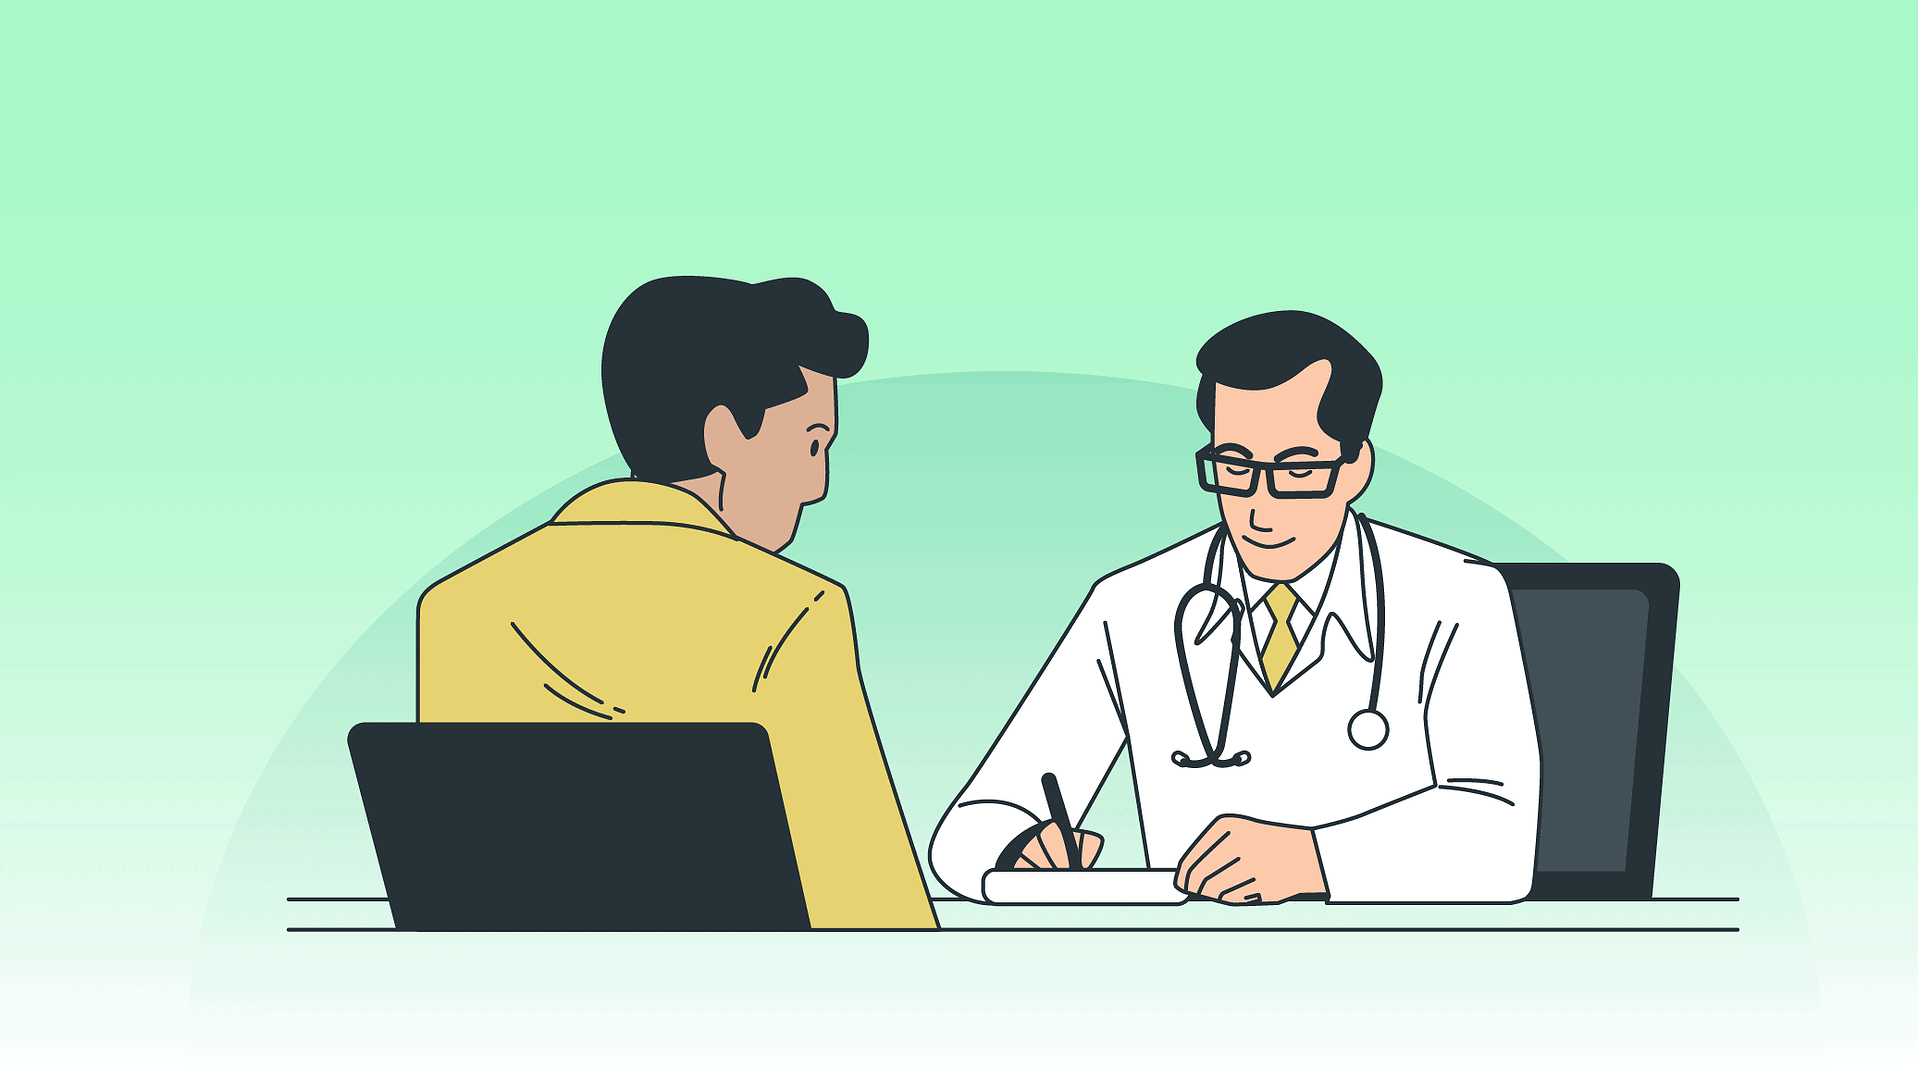 Talking dermatology with your clients